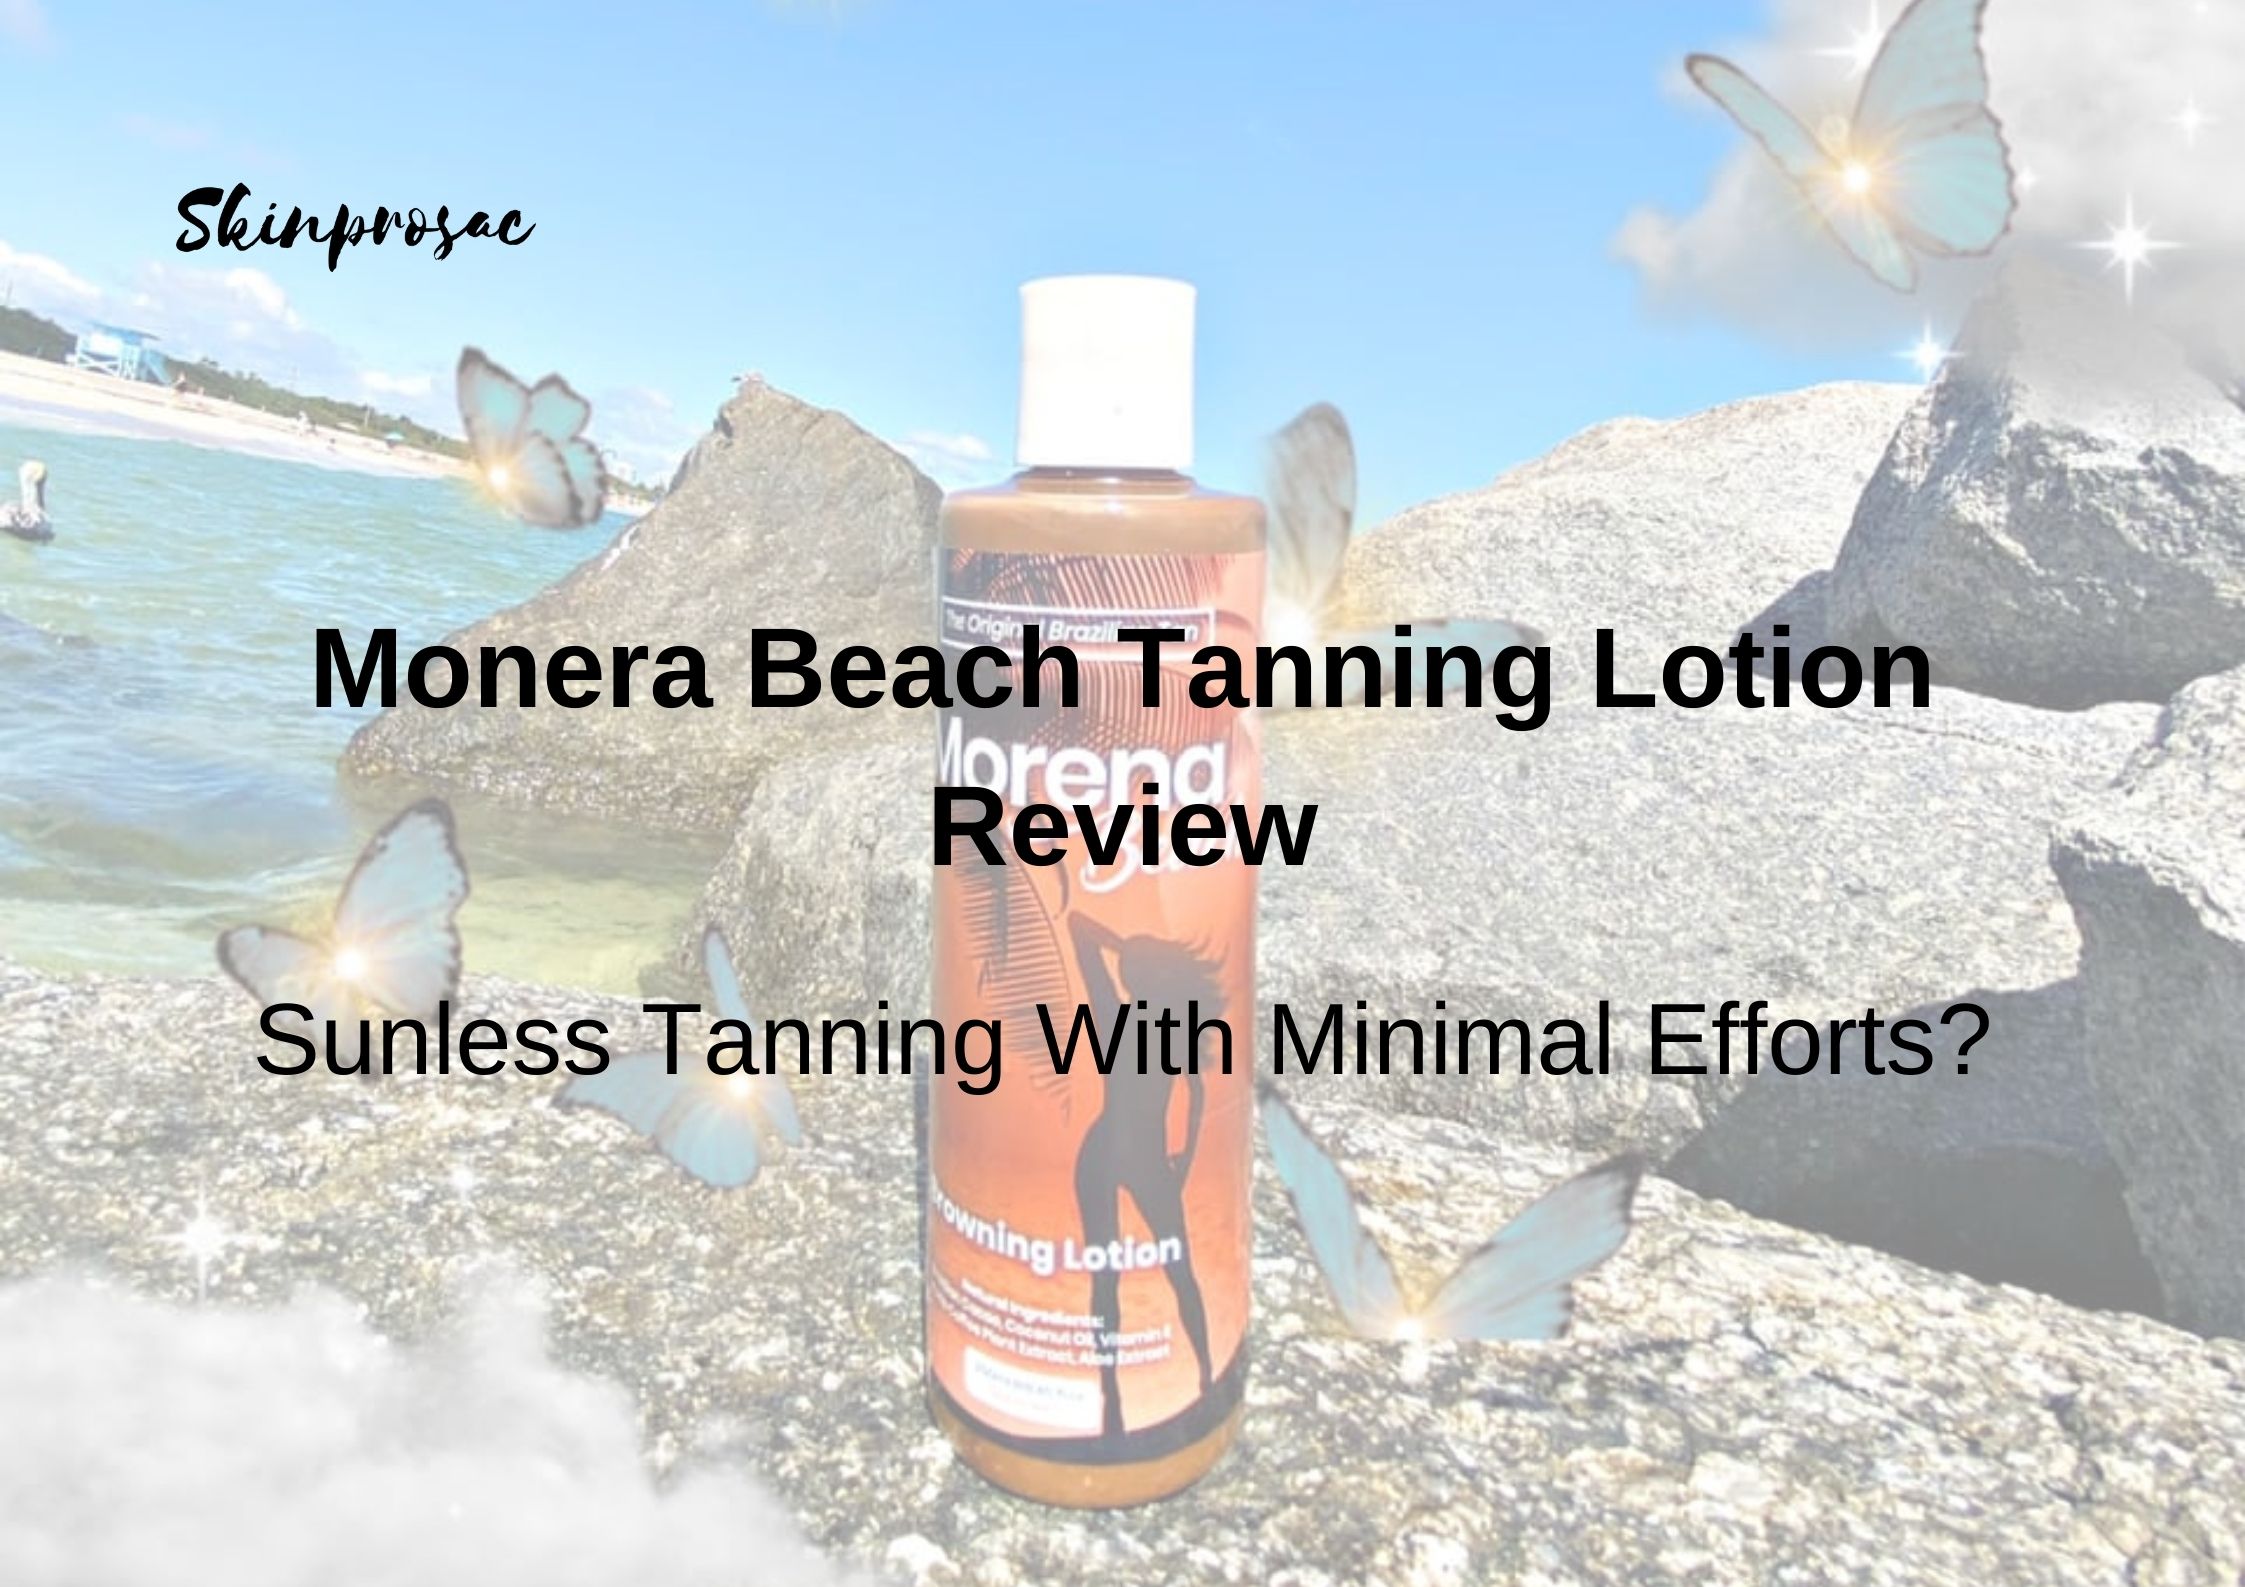 Monera Beach Tanning Lotion Review